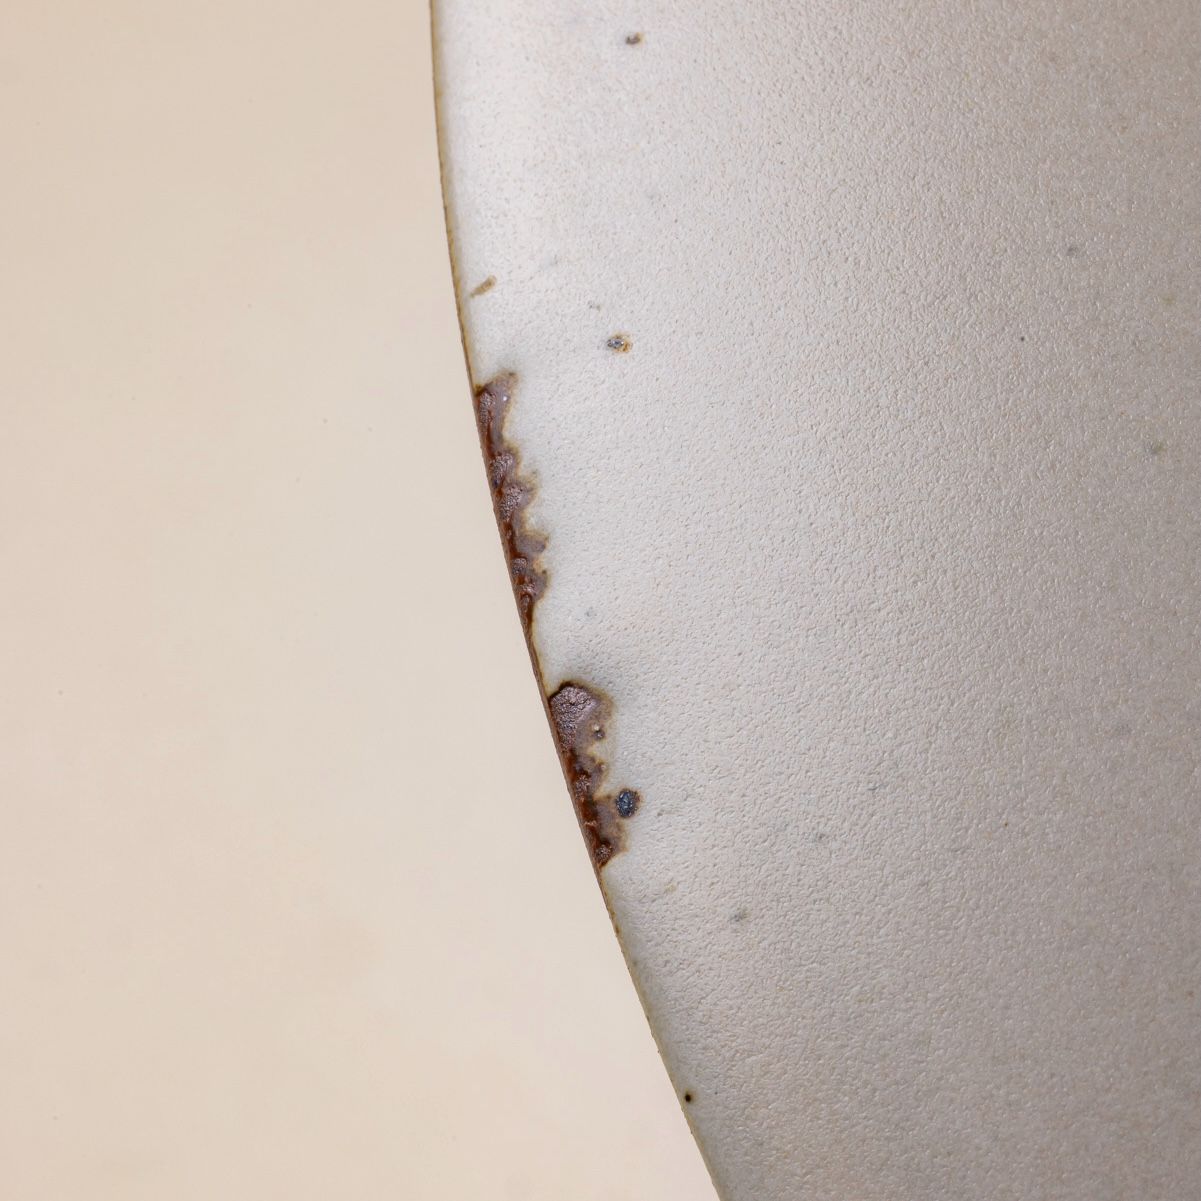 The edge of a ceramic bowl in a cool white color shows scuffs where the glaze was rubbed off, revealing unglazed clay.